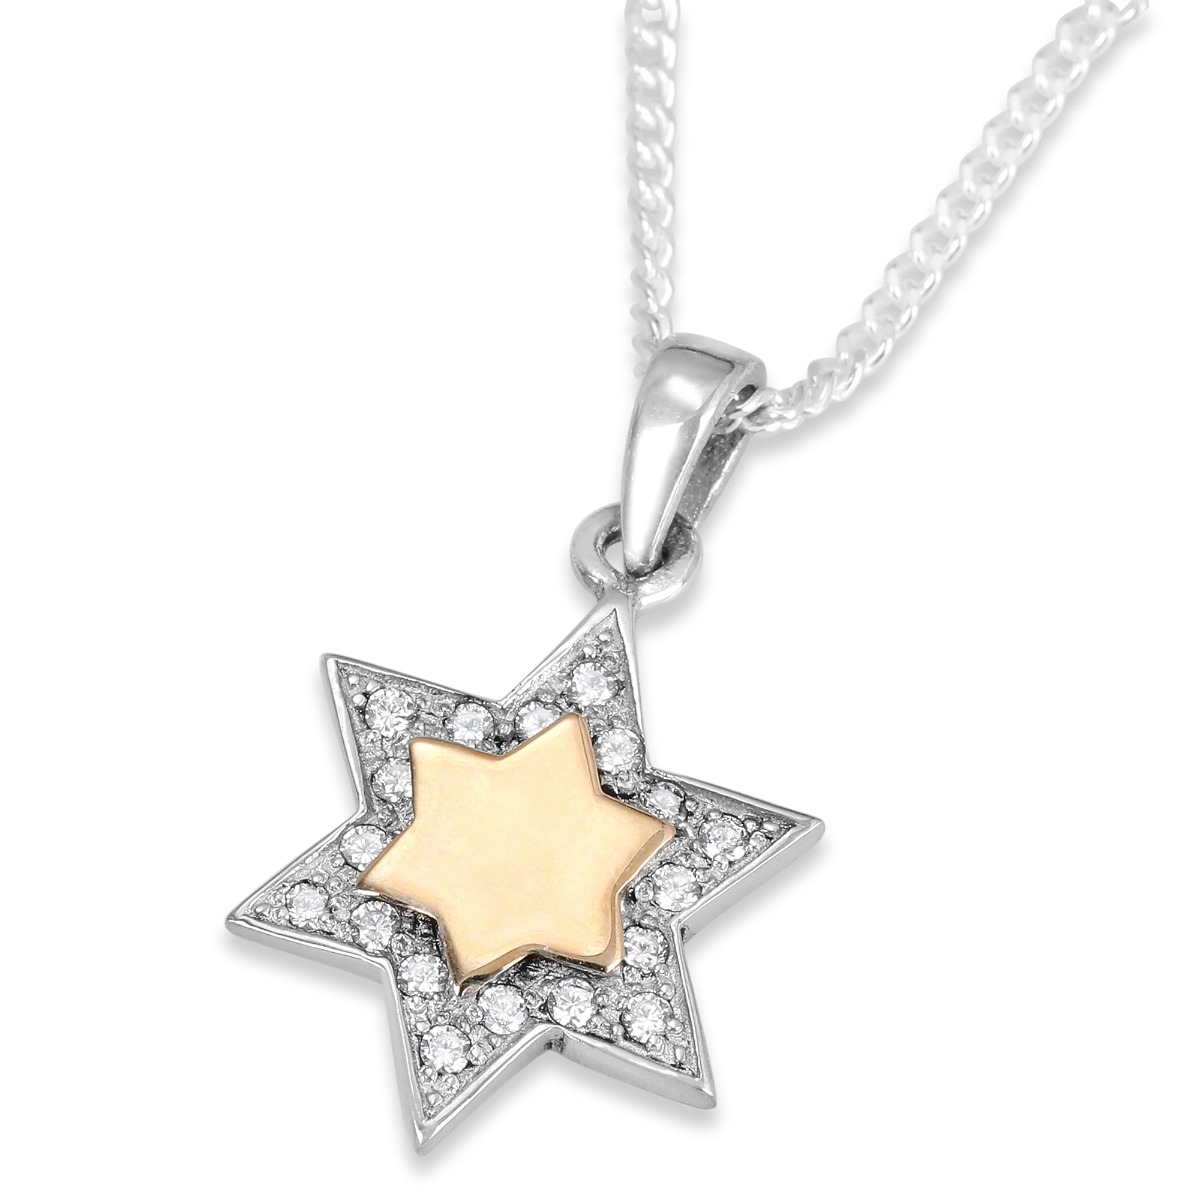 925 Sterling Silver and 9K Gold Star of David Pendant with White Zircon Stones - 1